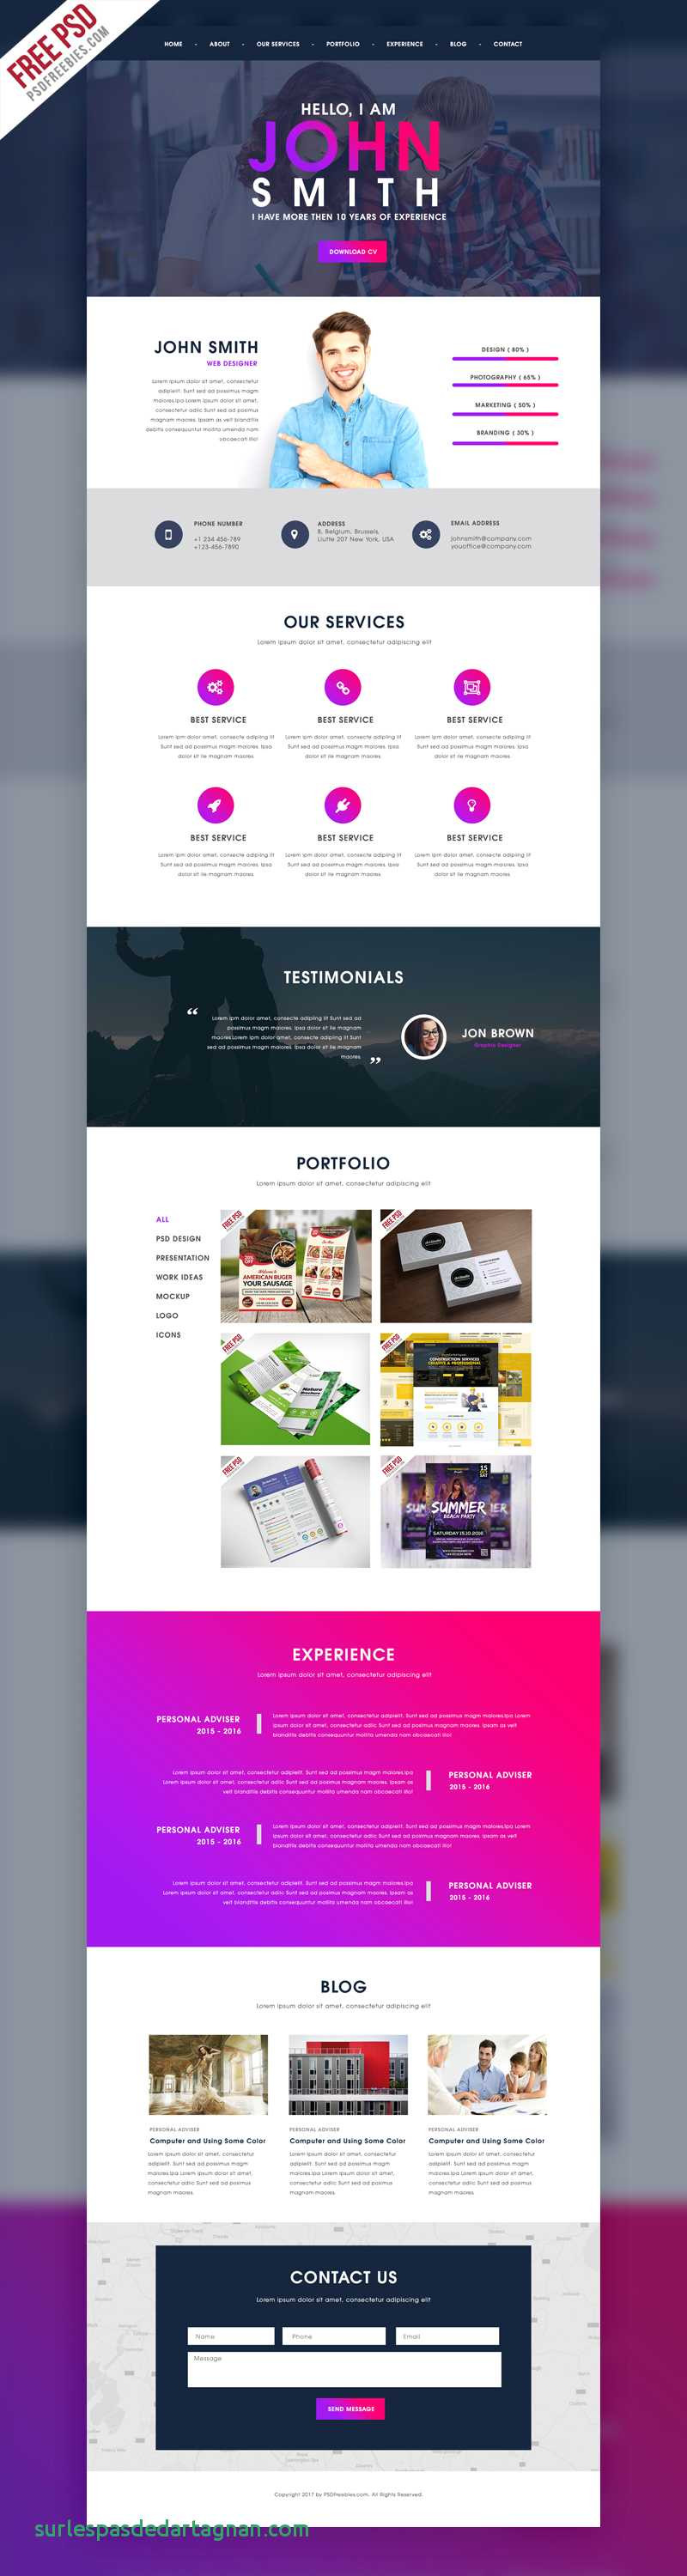 Free News Website Templates Good Design Dribbble Feed Of Business Card Website Template